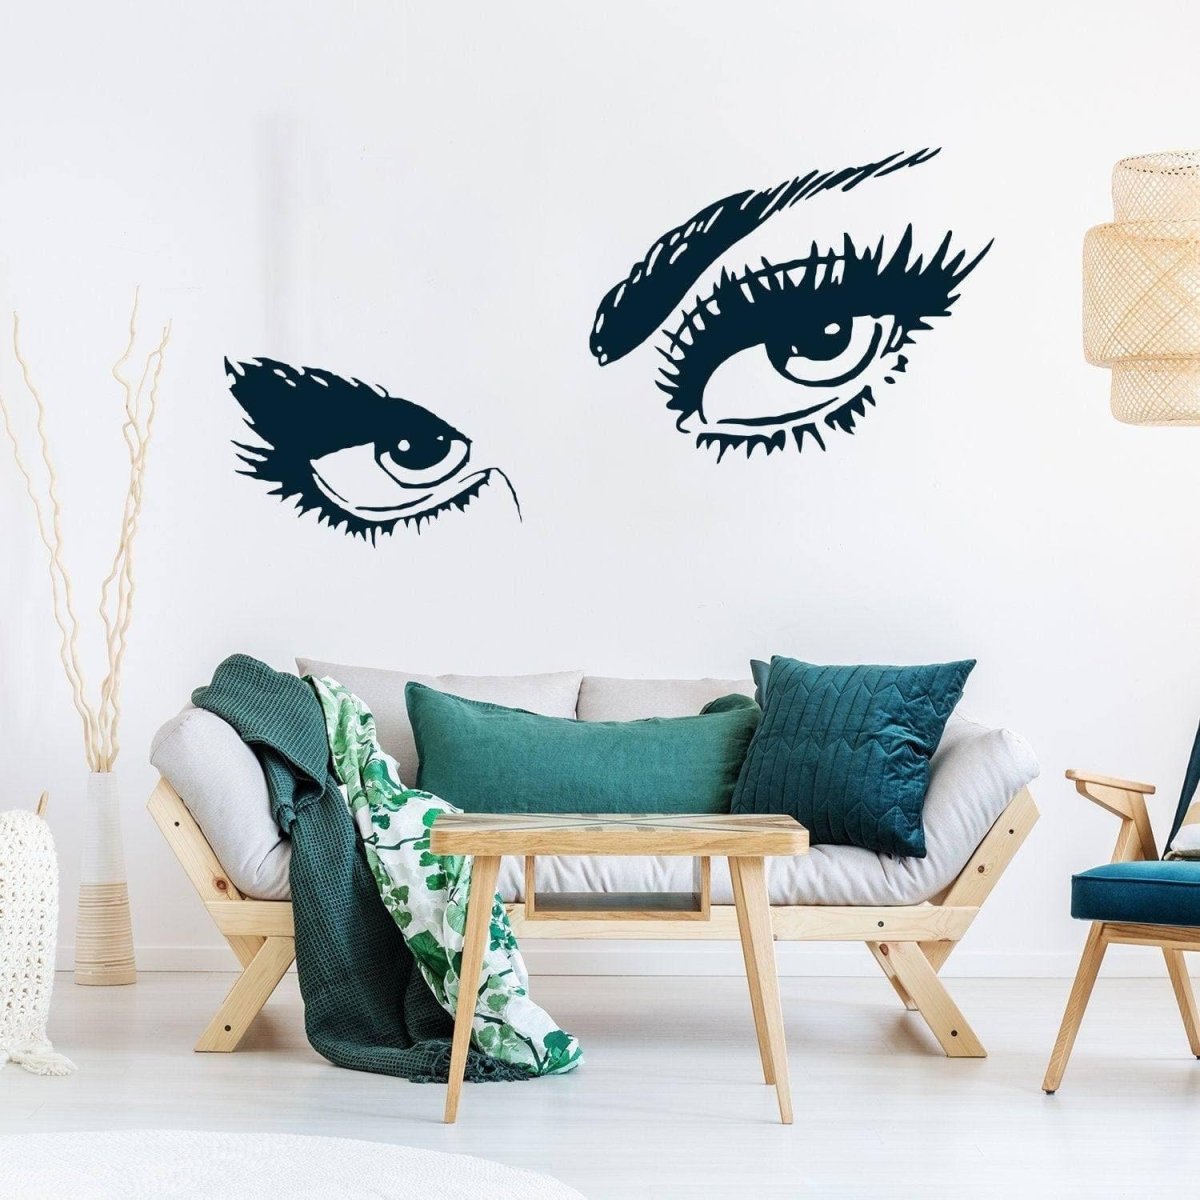 Elegant Eye Décor: Vinyl Wall Sticker for Beauty and Style - Decords